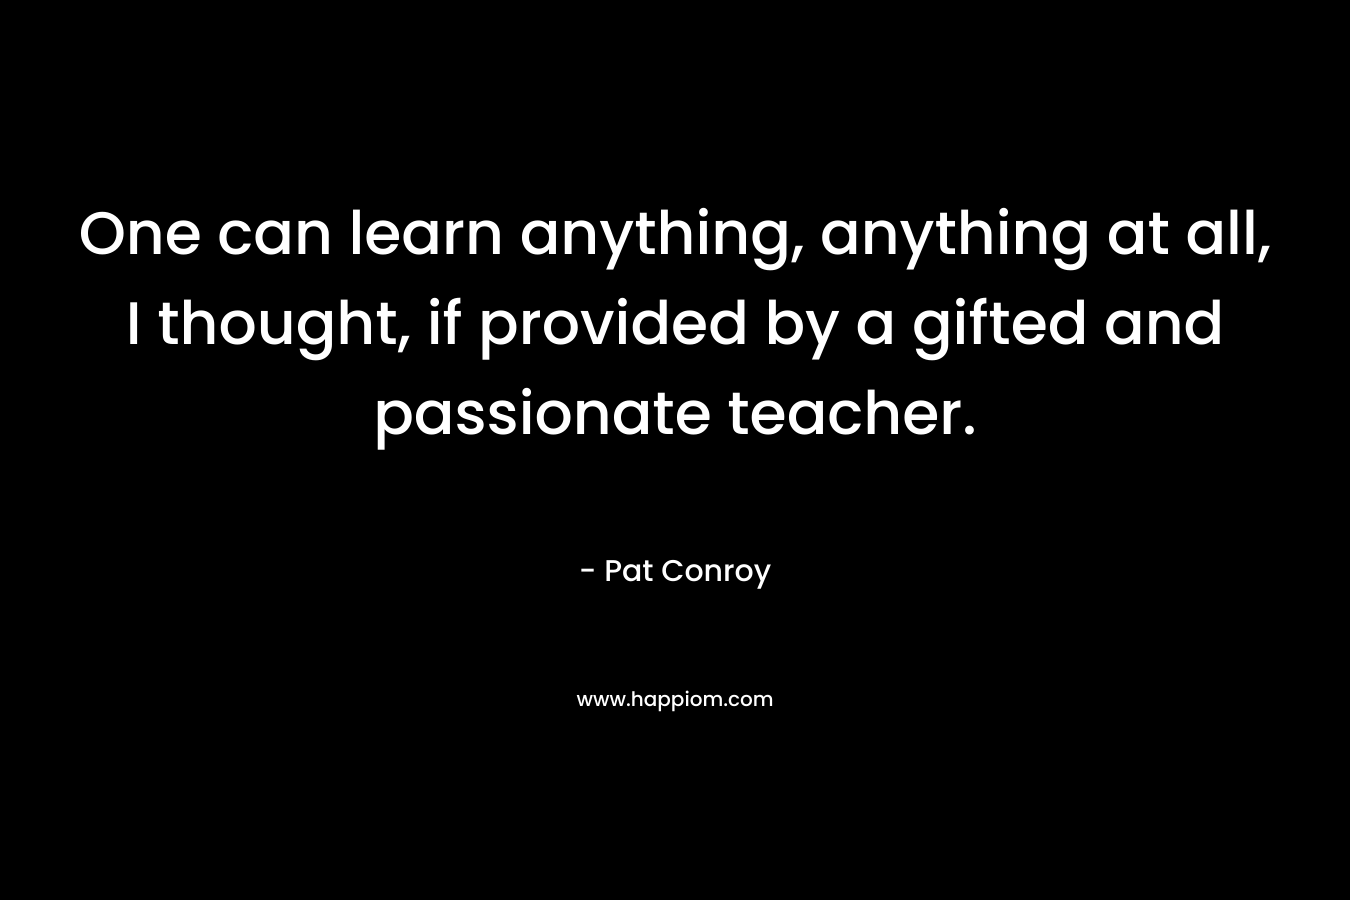 One can learn anything, anything at all, I thought, if provided by a gifted and passionate teacher.